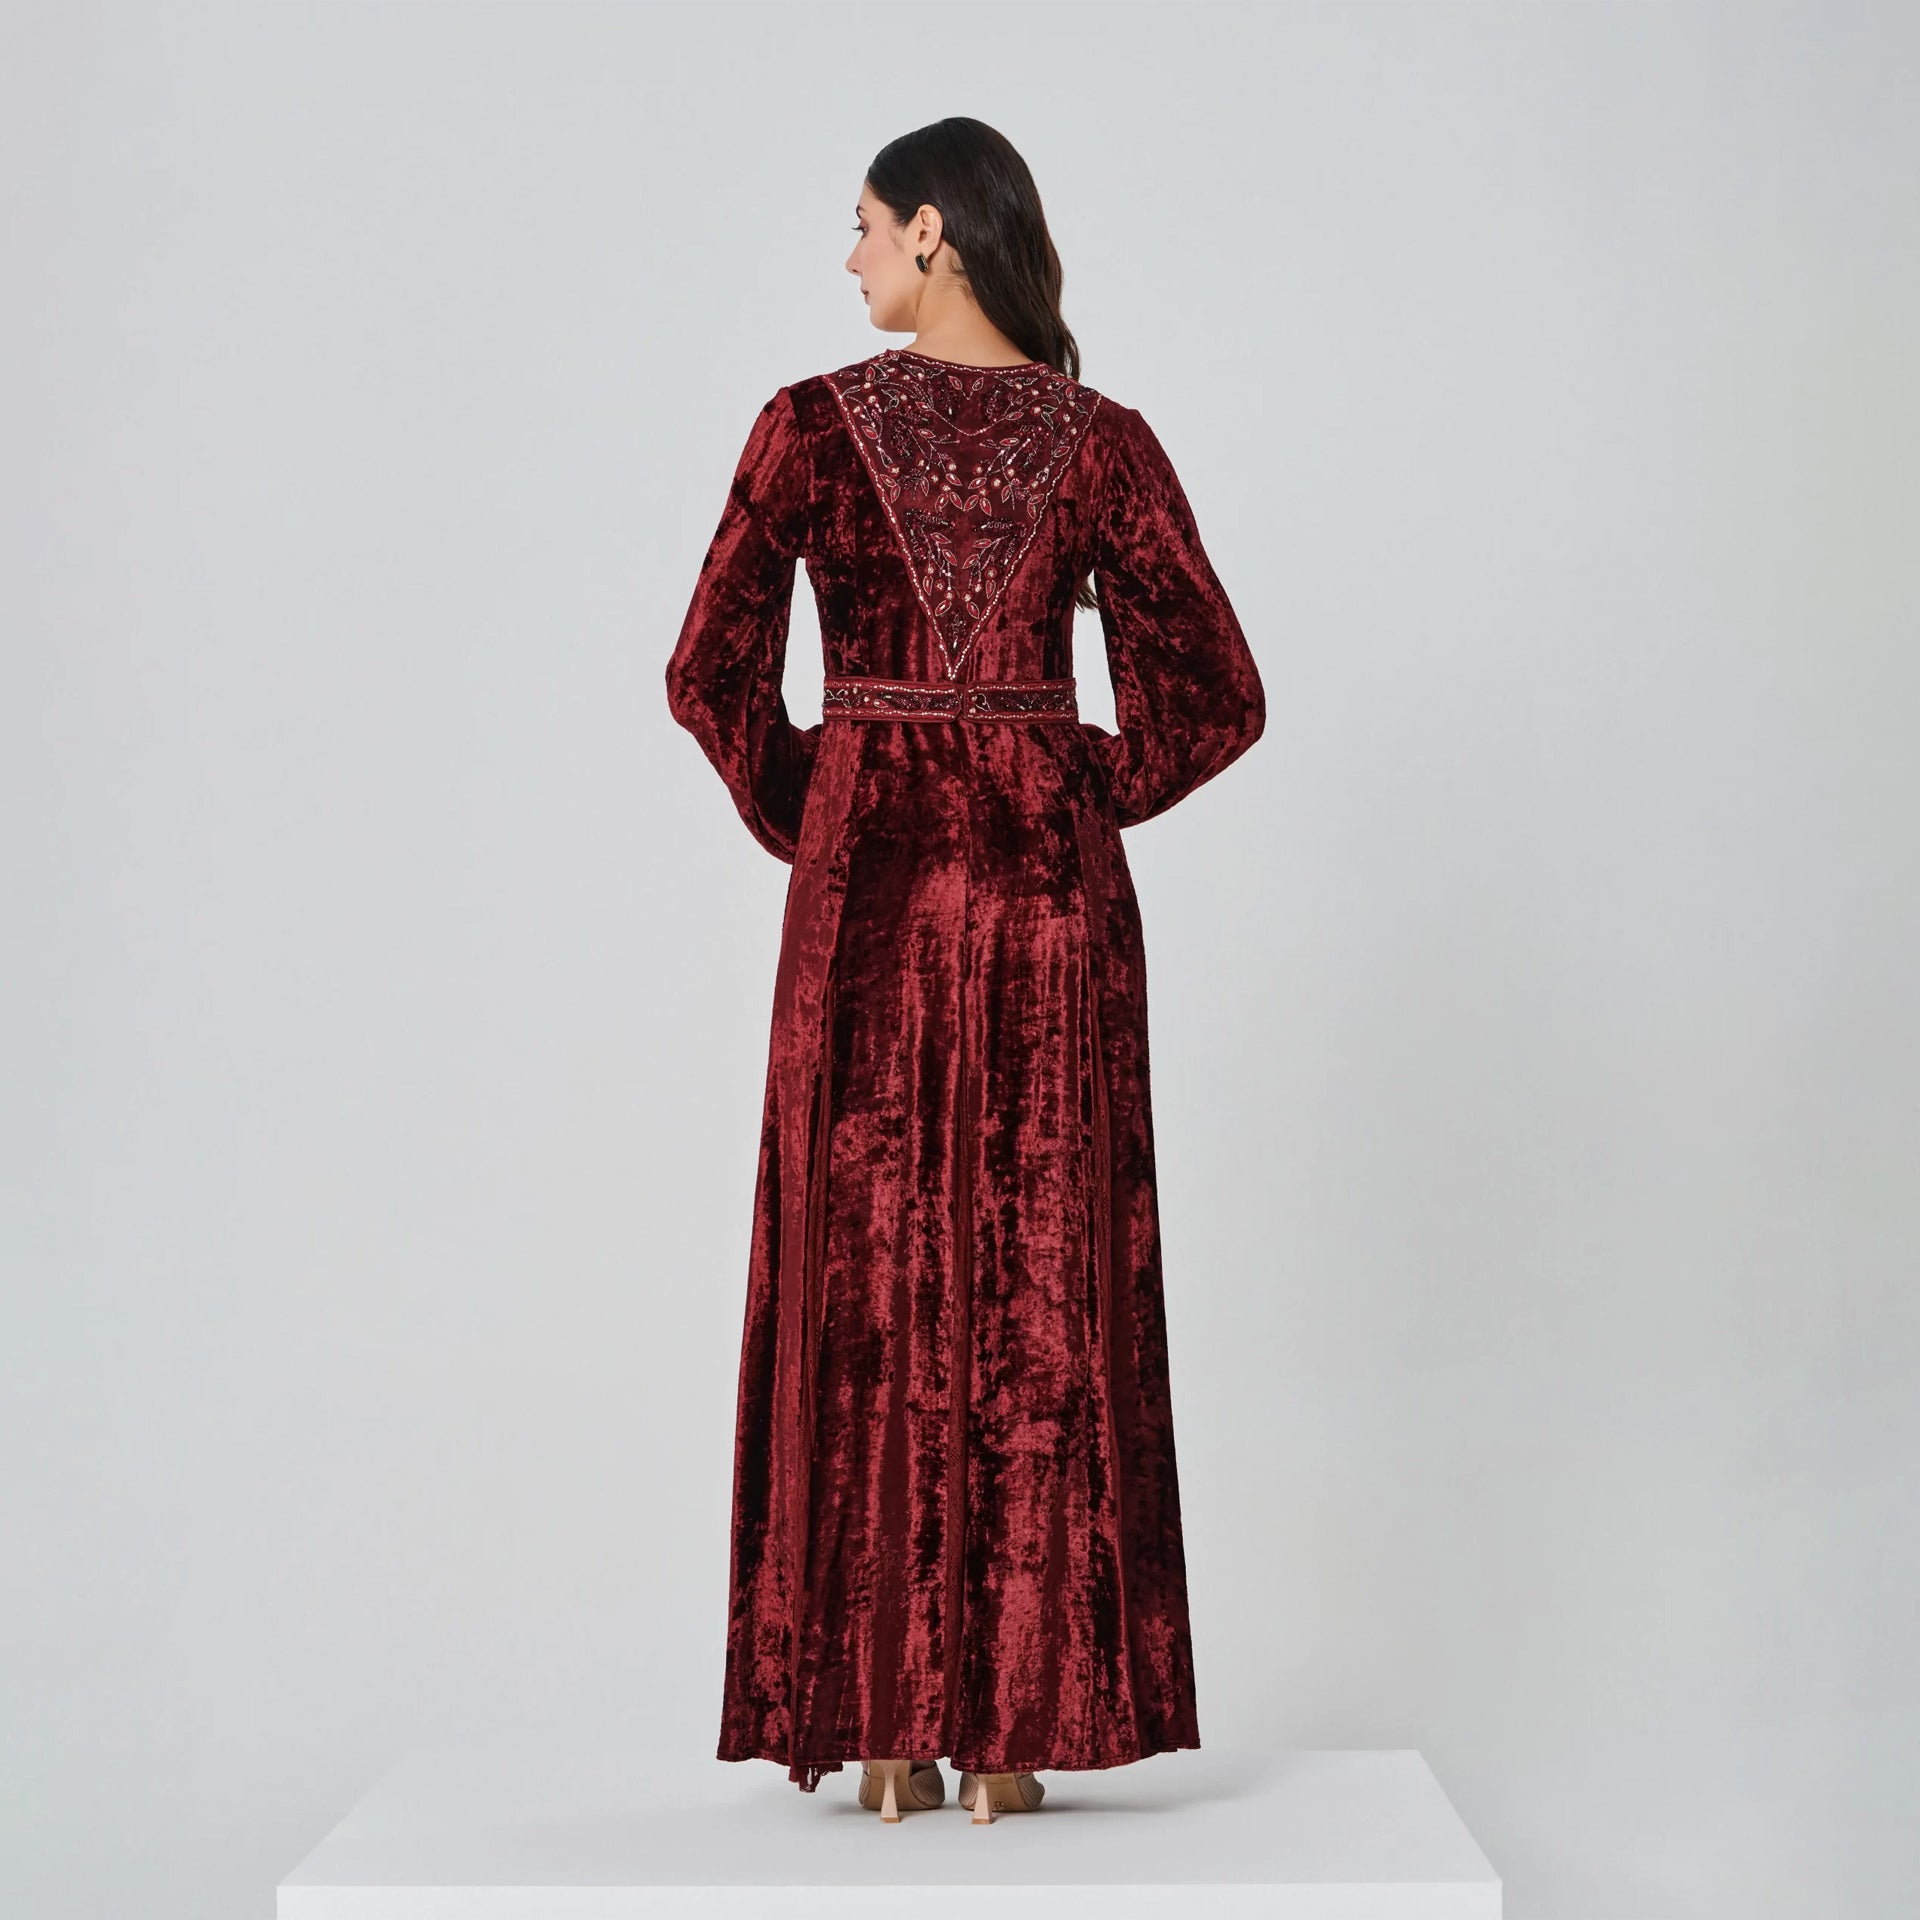 Brown Velvet Nolaya Dress With Long Sleeves And Gold Embroidery From Shalky